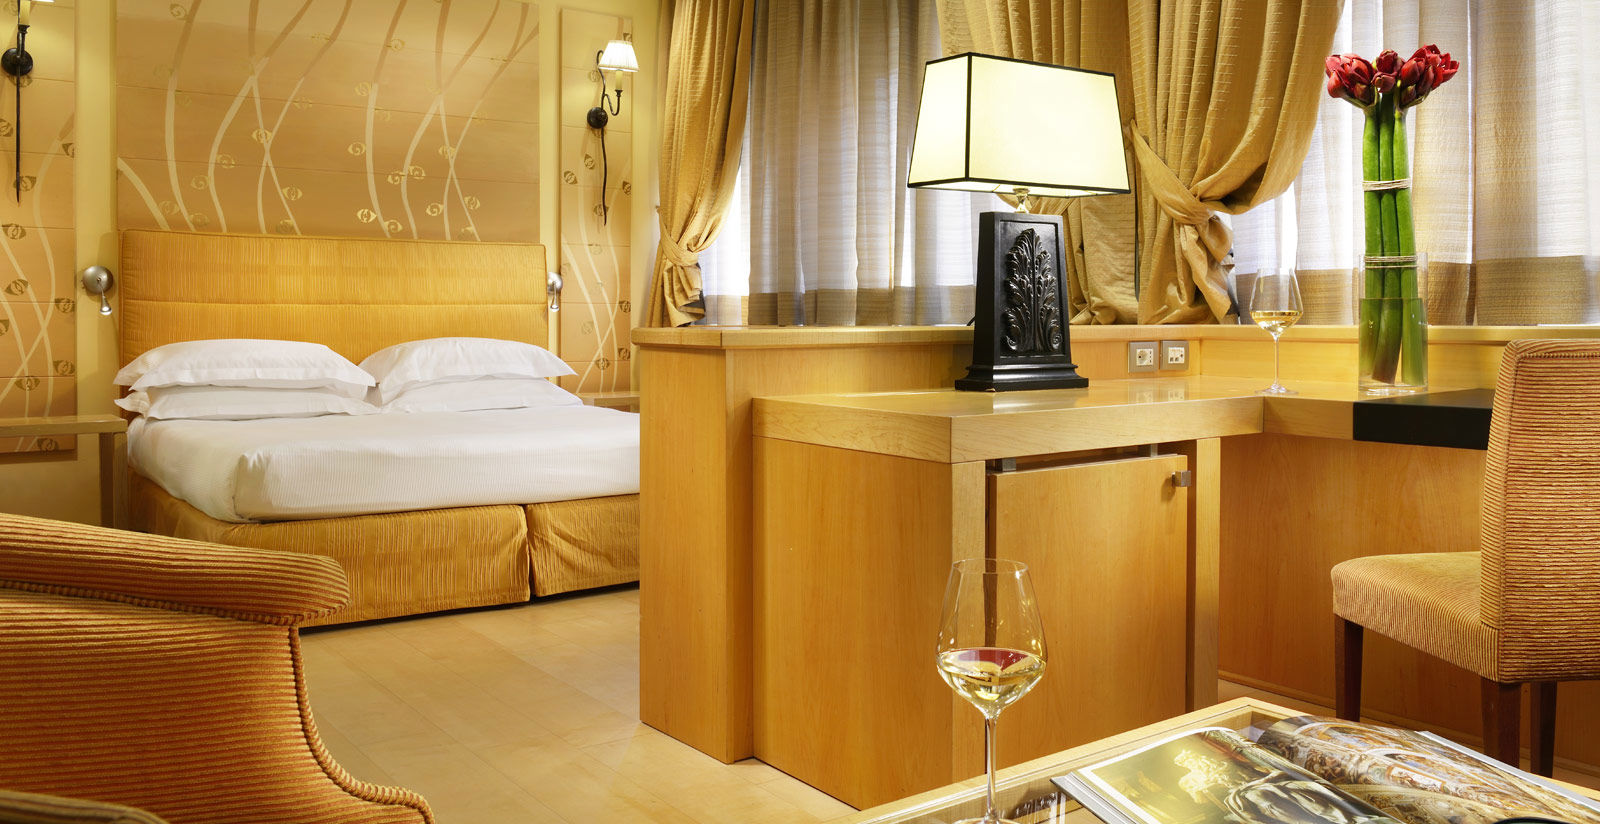 Grand Hotel Palatino - Deluxe Rooms in Rome with view of rione Monti  1